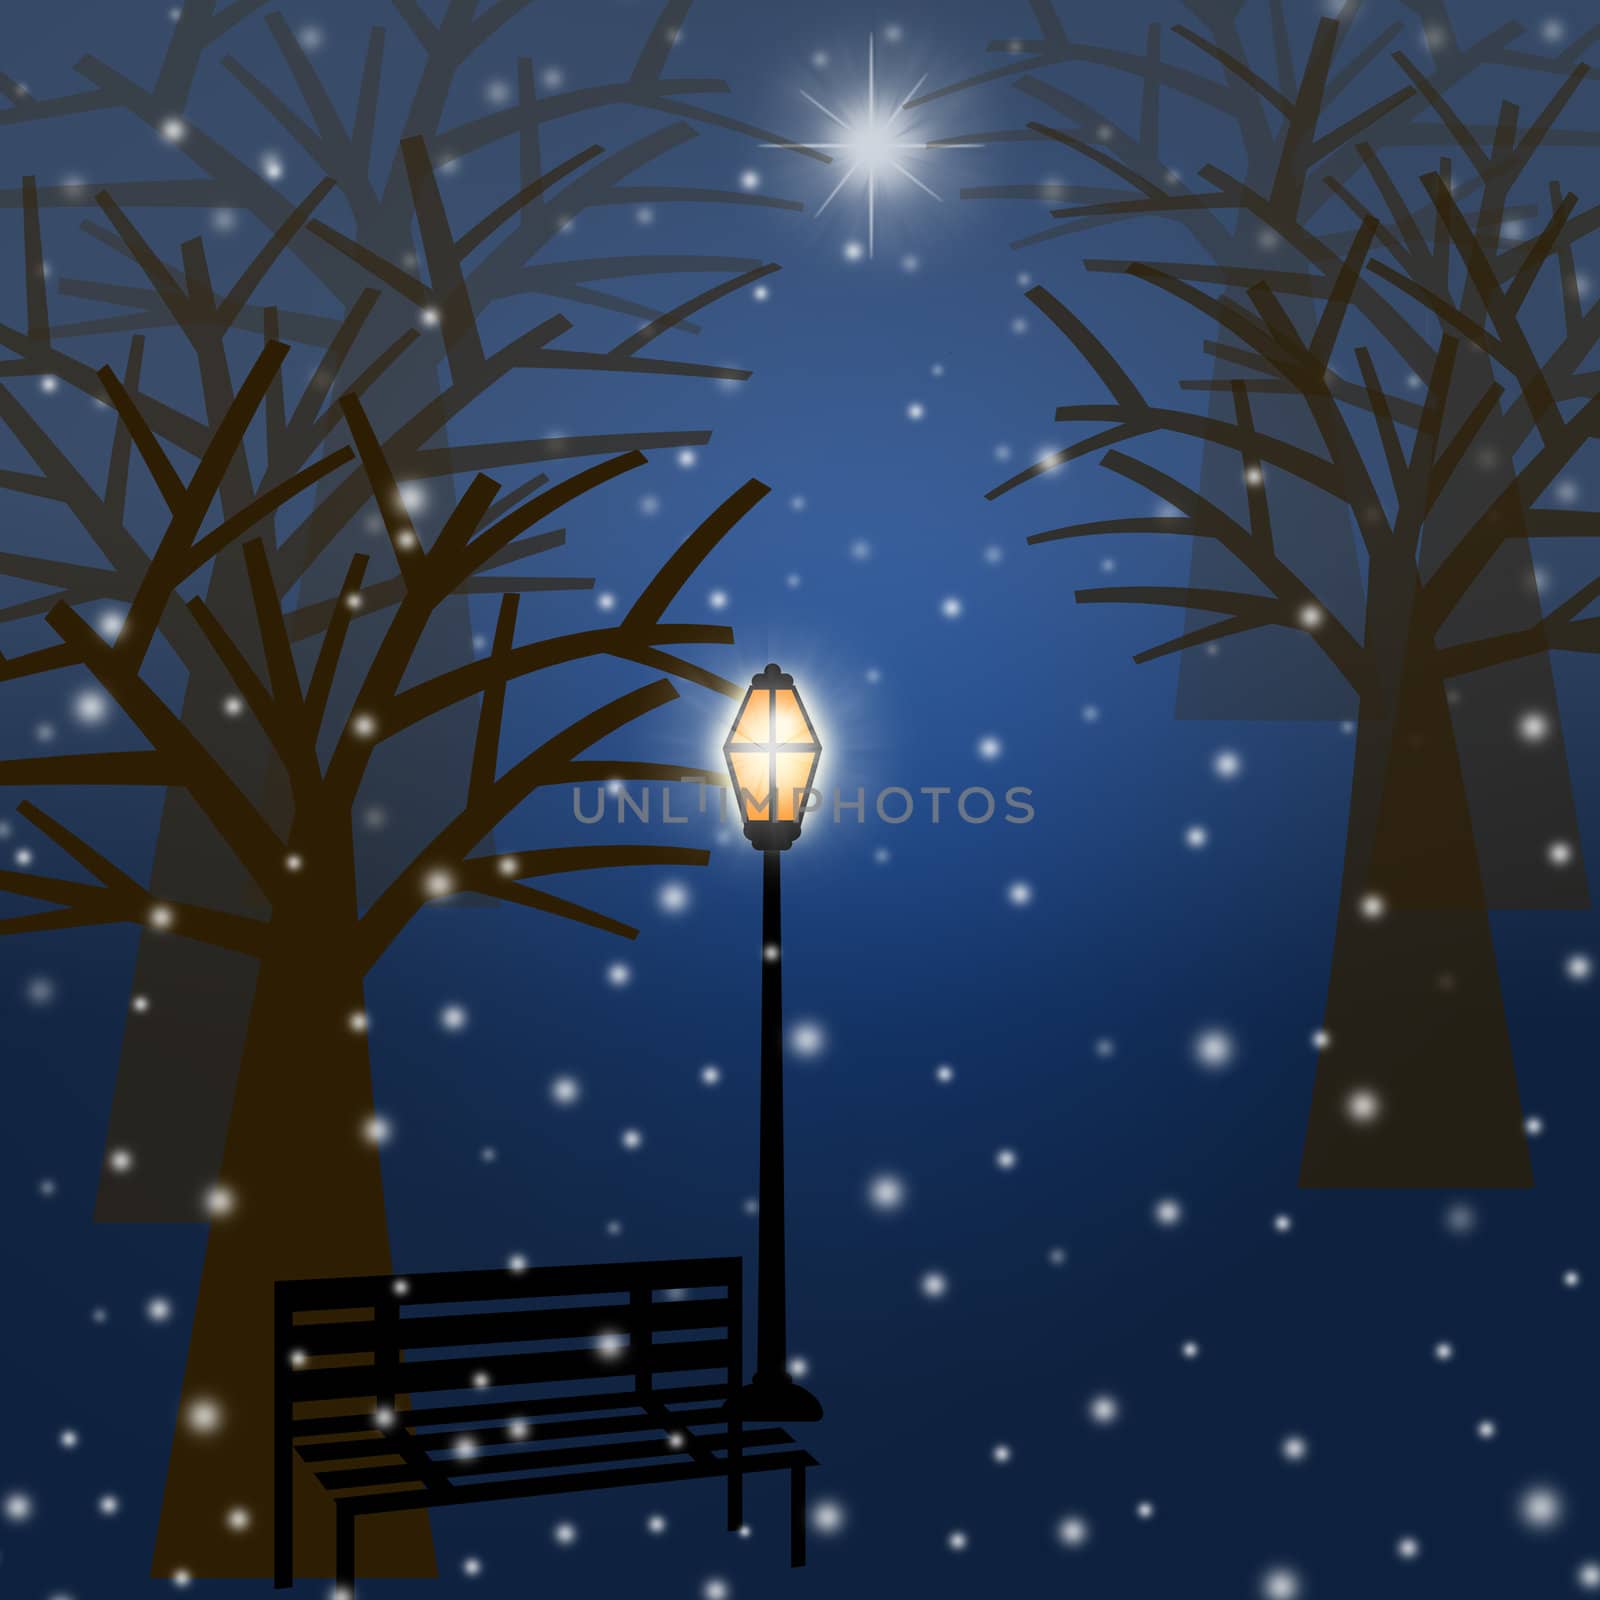 Foggy Christmas Winter Park Scene with Snowflakes and Star Illustration